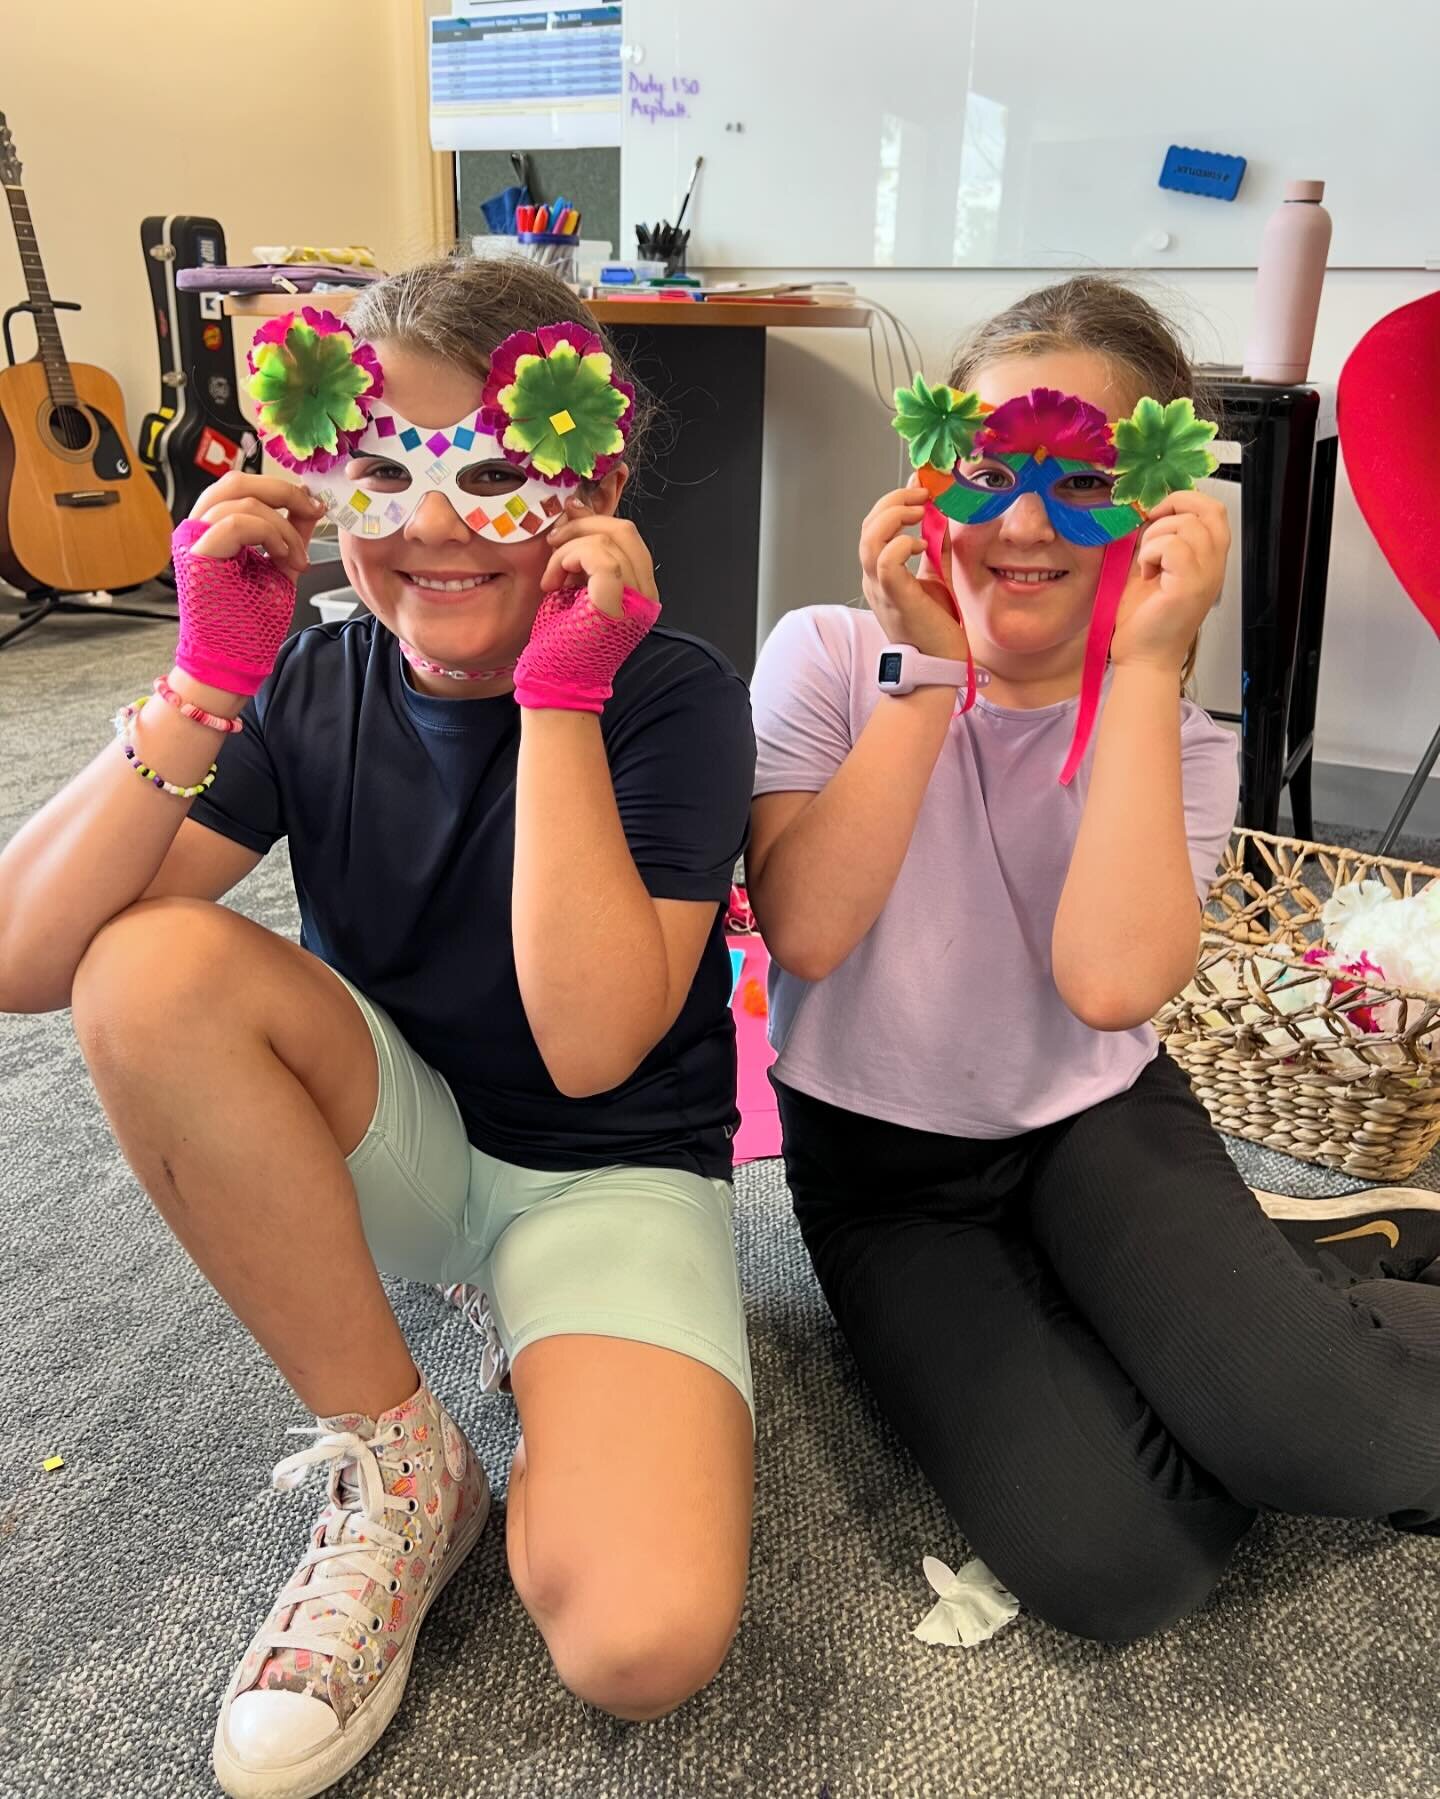 This week in Italian, we are learning about &lsquo;Carnivale Venezia&rsquo; which is an annual festival held in Venice. 
It&rsquo;s famous for its elaborate costumes and masks!

Here are some of the wonderful masks students have created throughout th